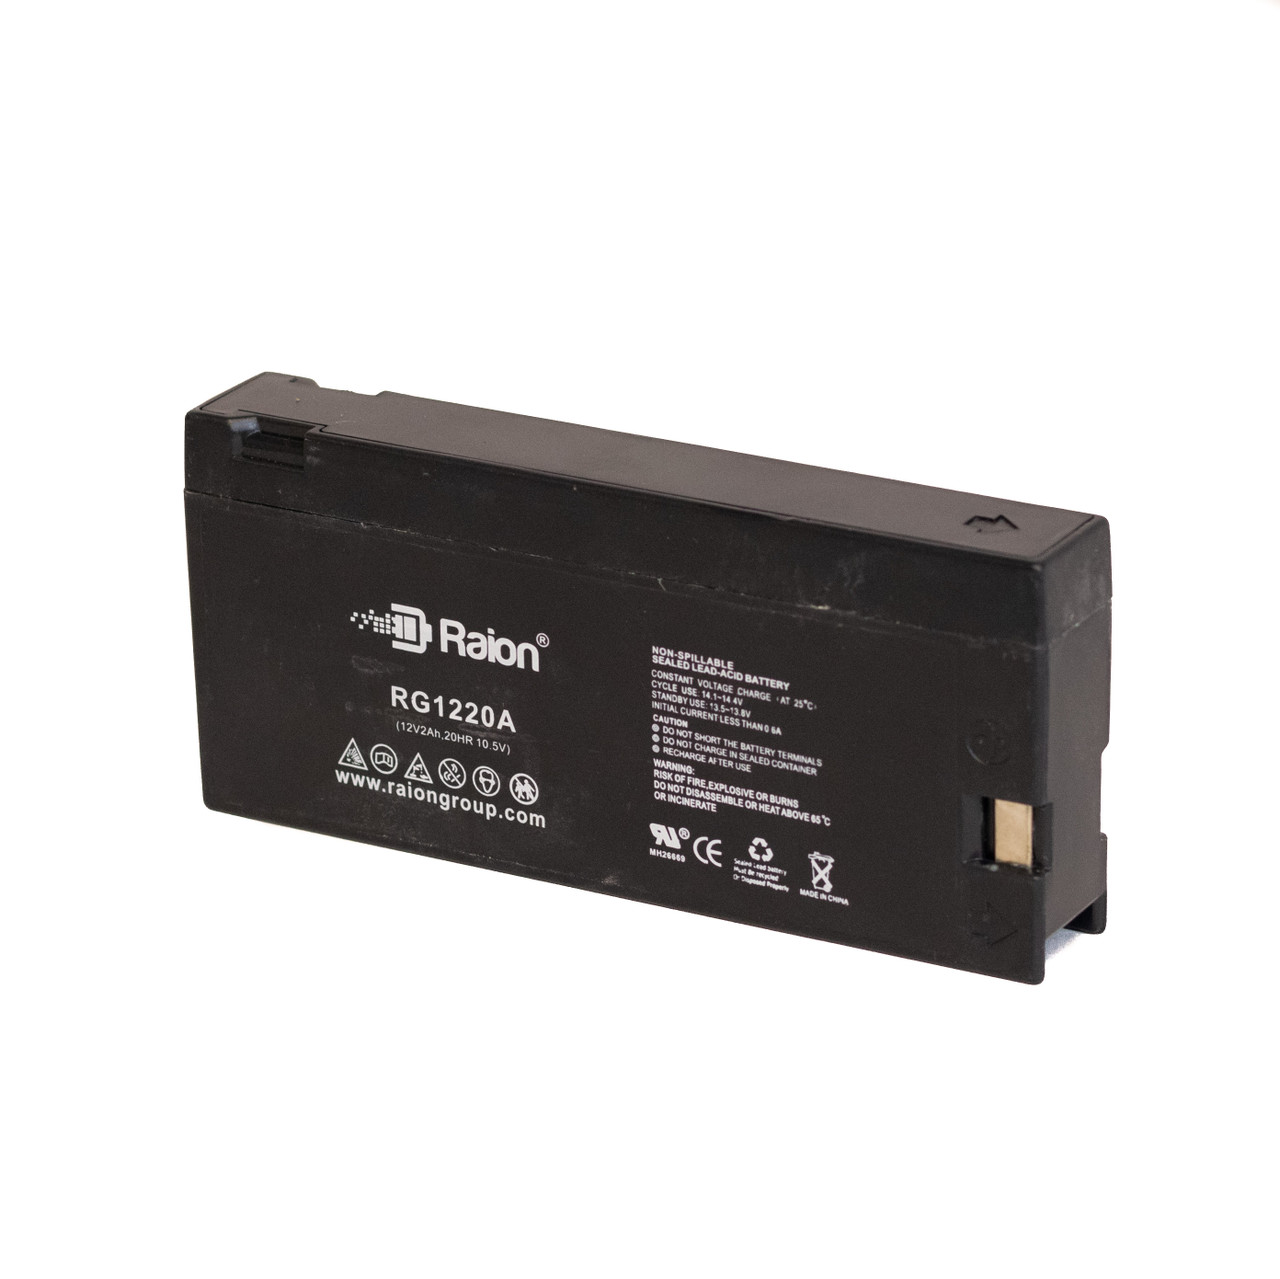 Raion Power RG1220A Replacement Battery for JC Penney 686-6023